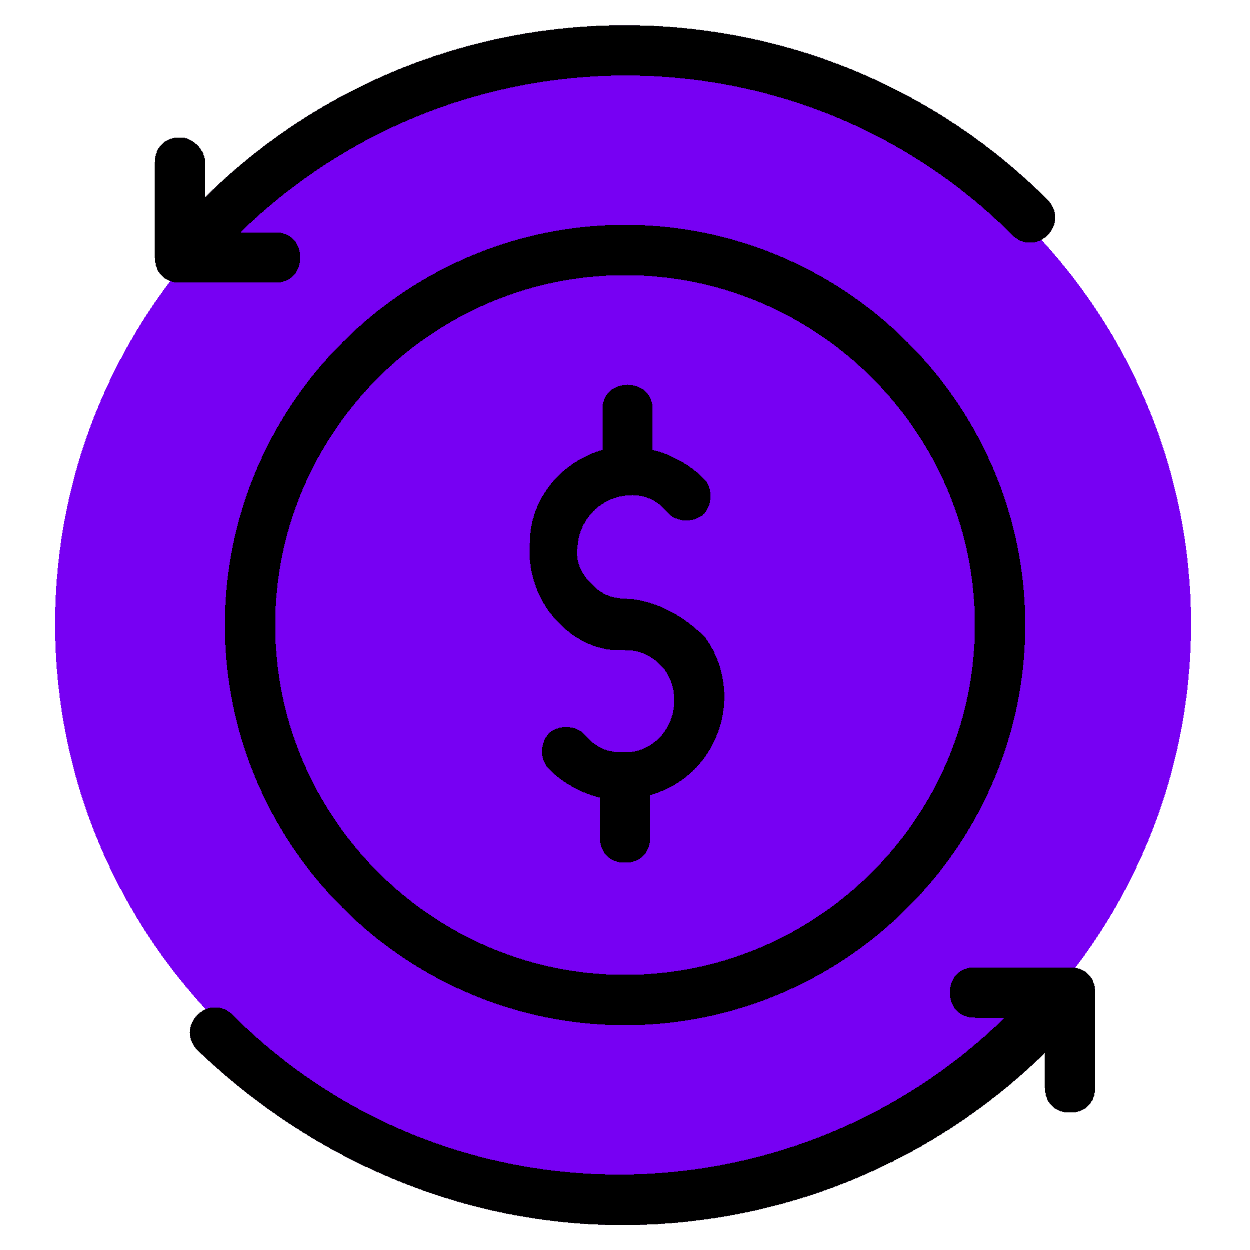 A purple graphic that has arrows going in a circular motion with a dollar sign in the center.